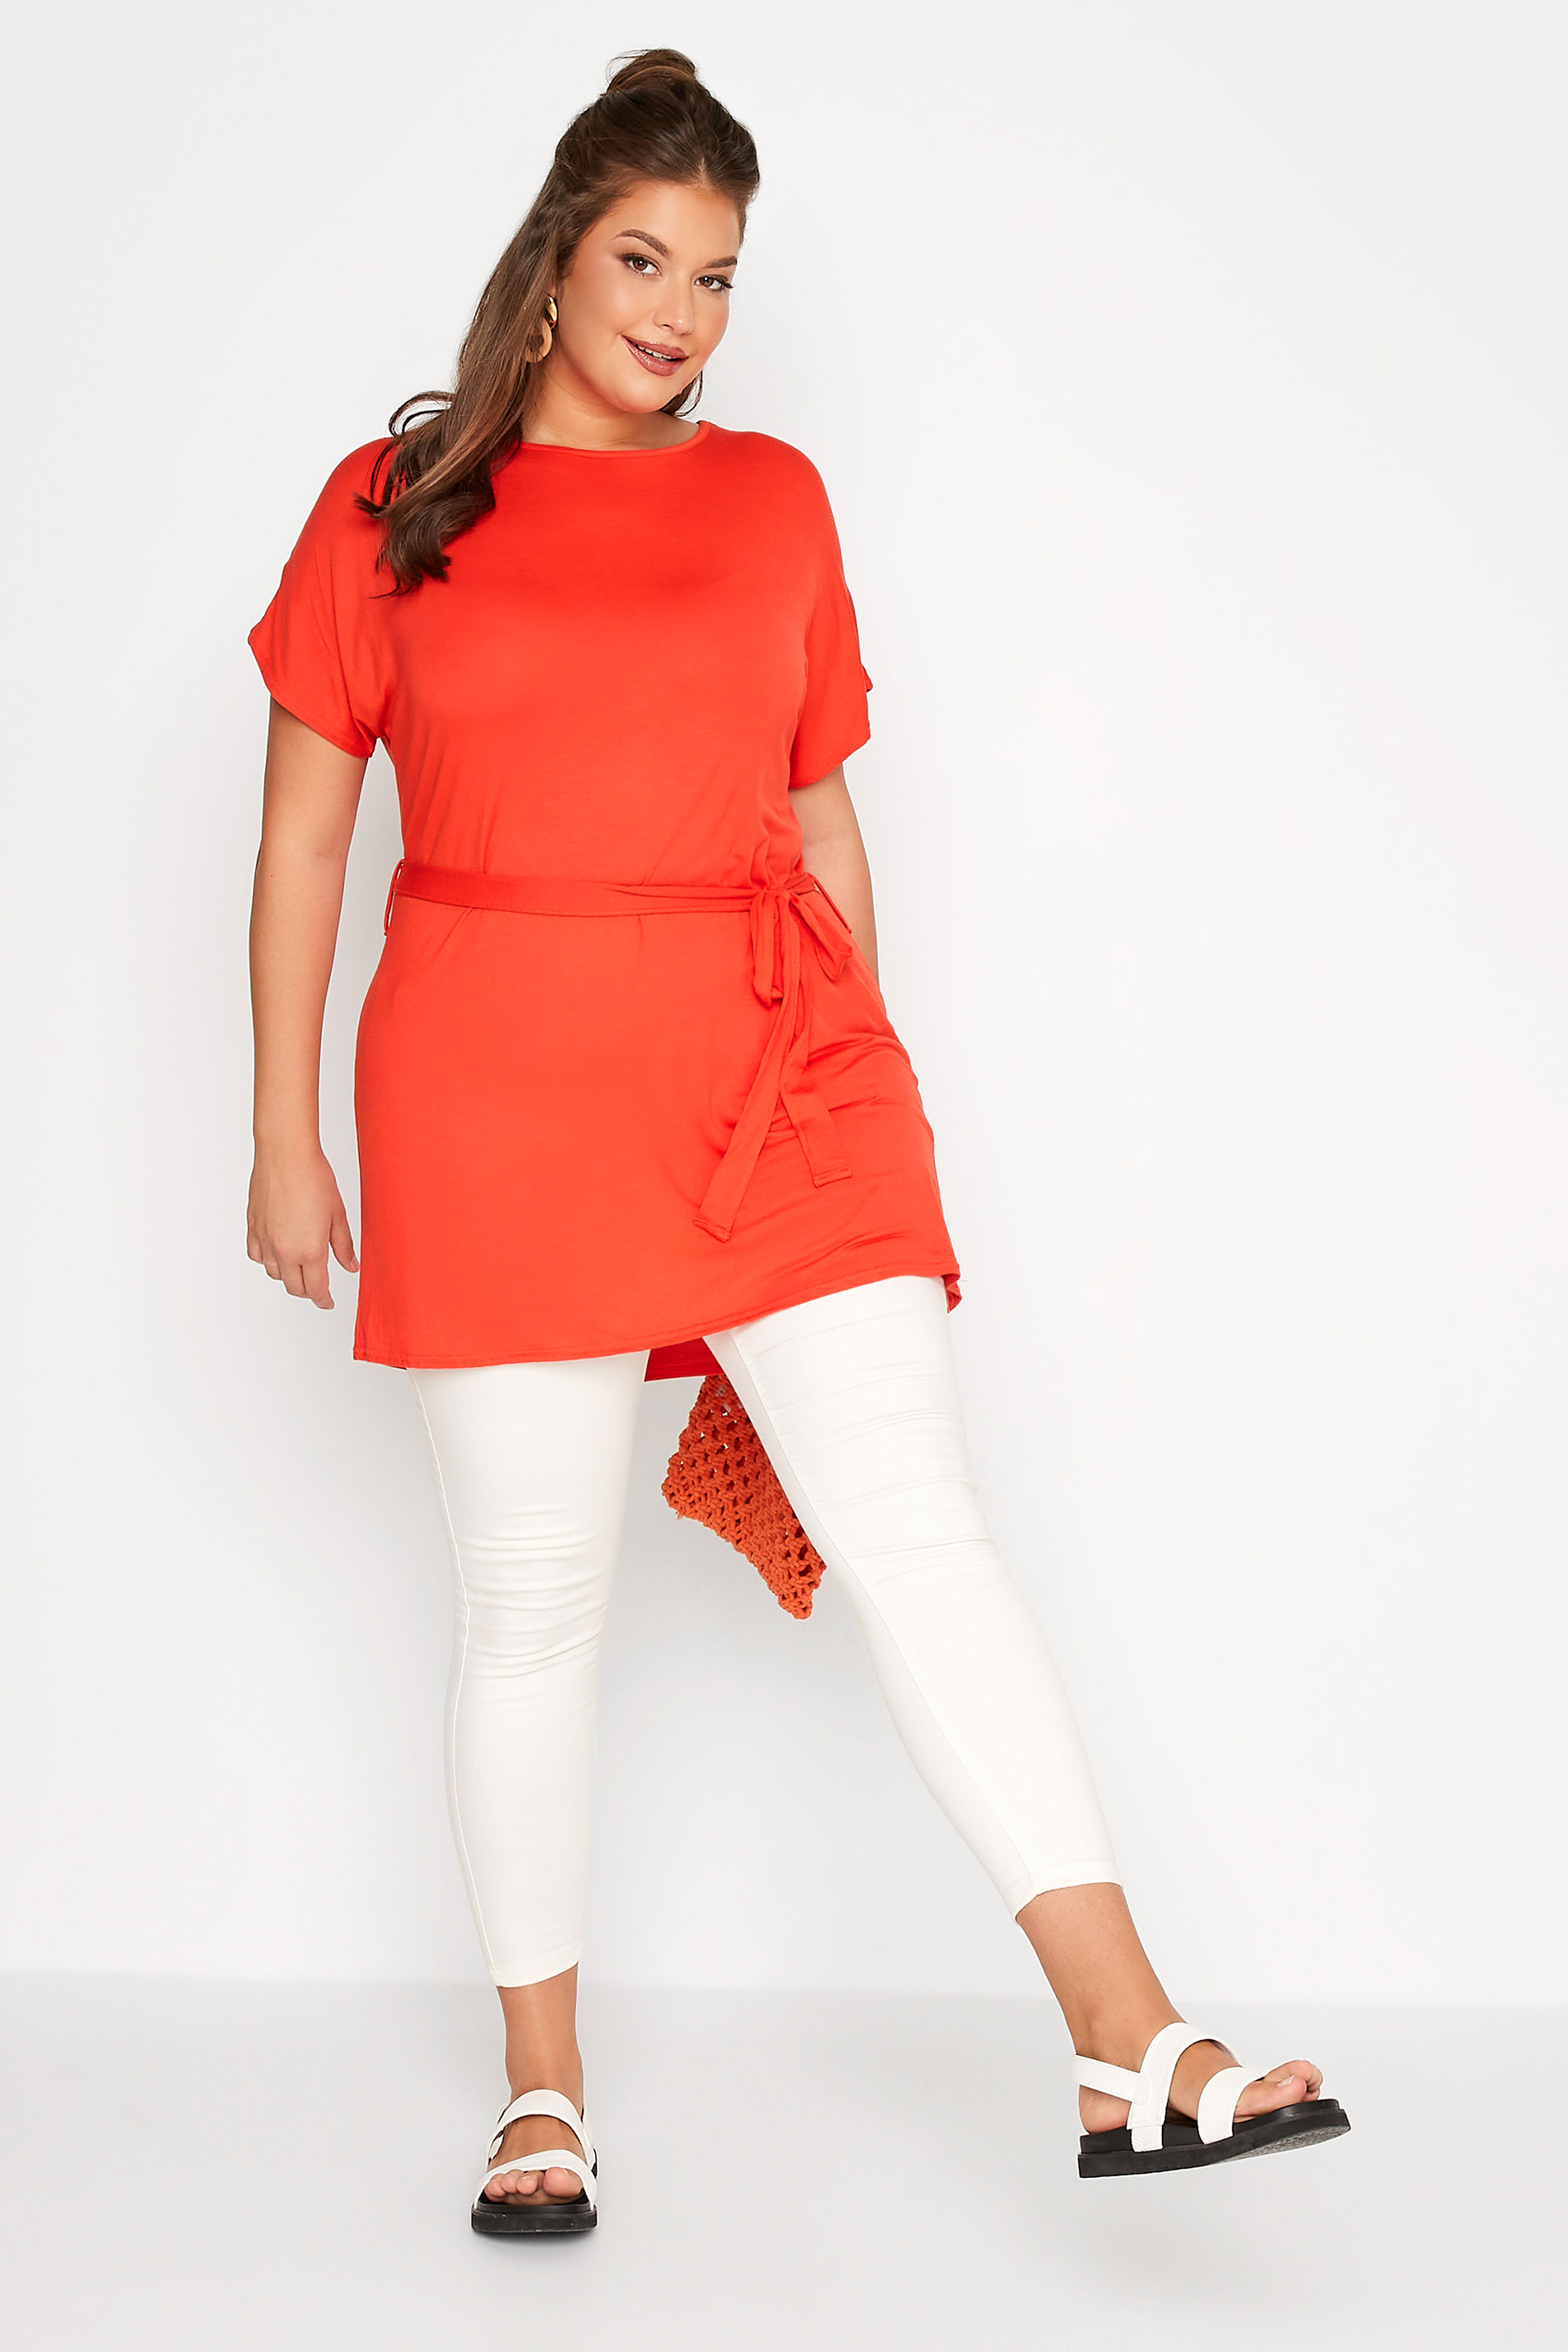 Grande taille  Tops Grande taille  Tops Casual | LIMITED COLLECTION Curve Orange Waist Tie Top - FV90412